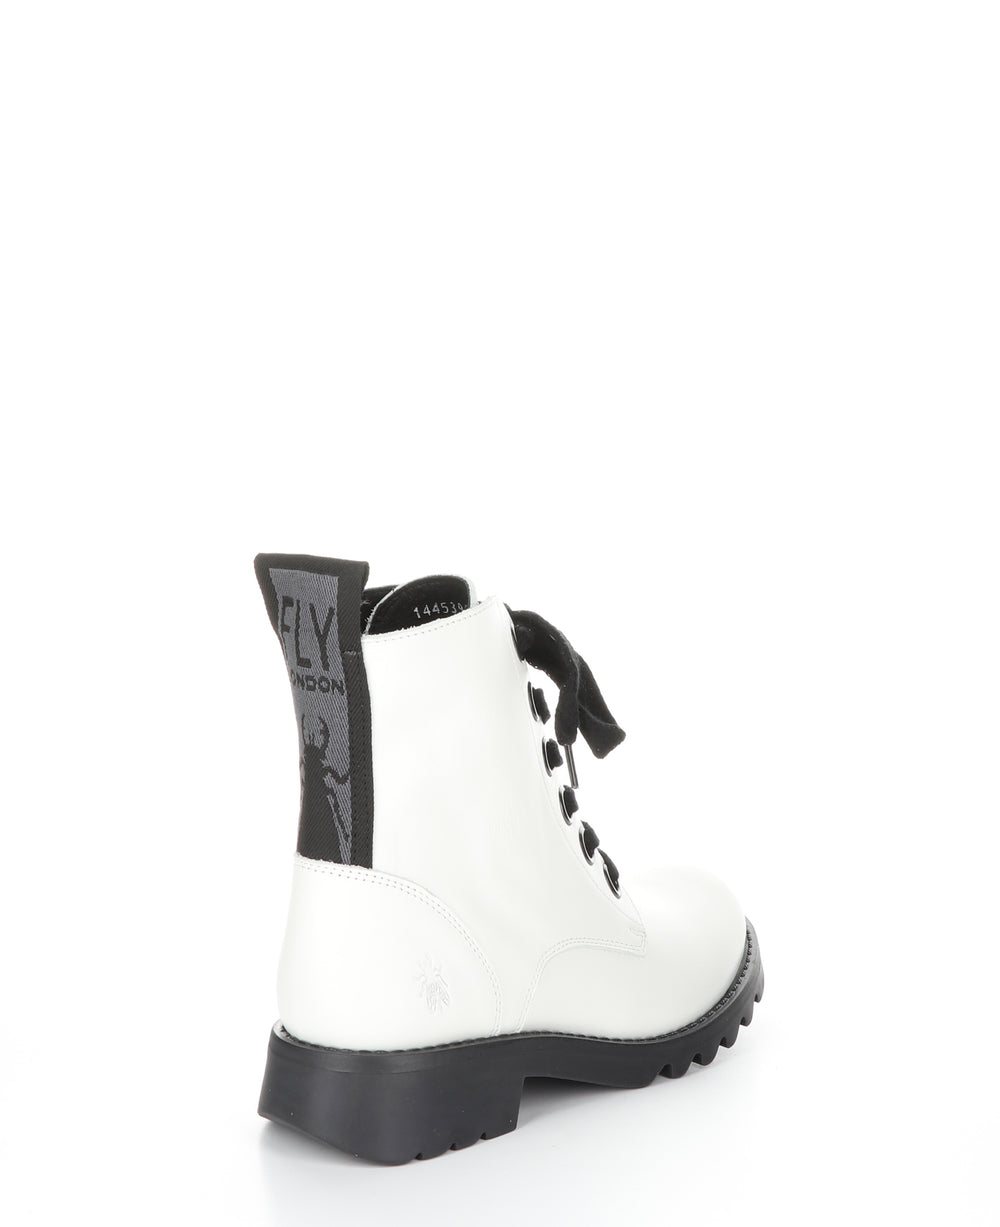 RAGI539FLY Off White Round Toe Boots